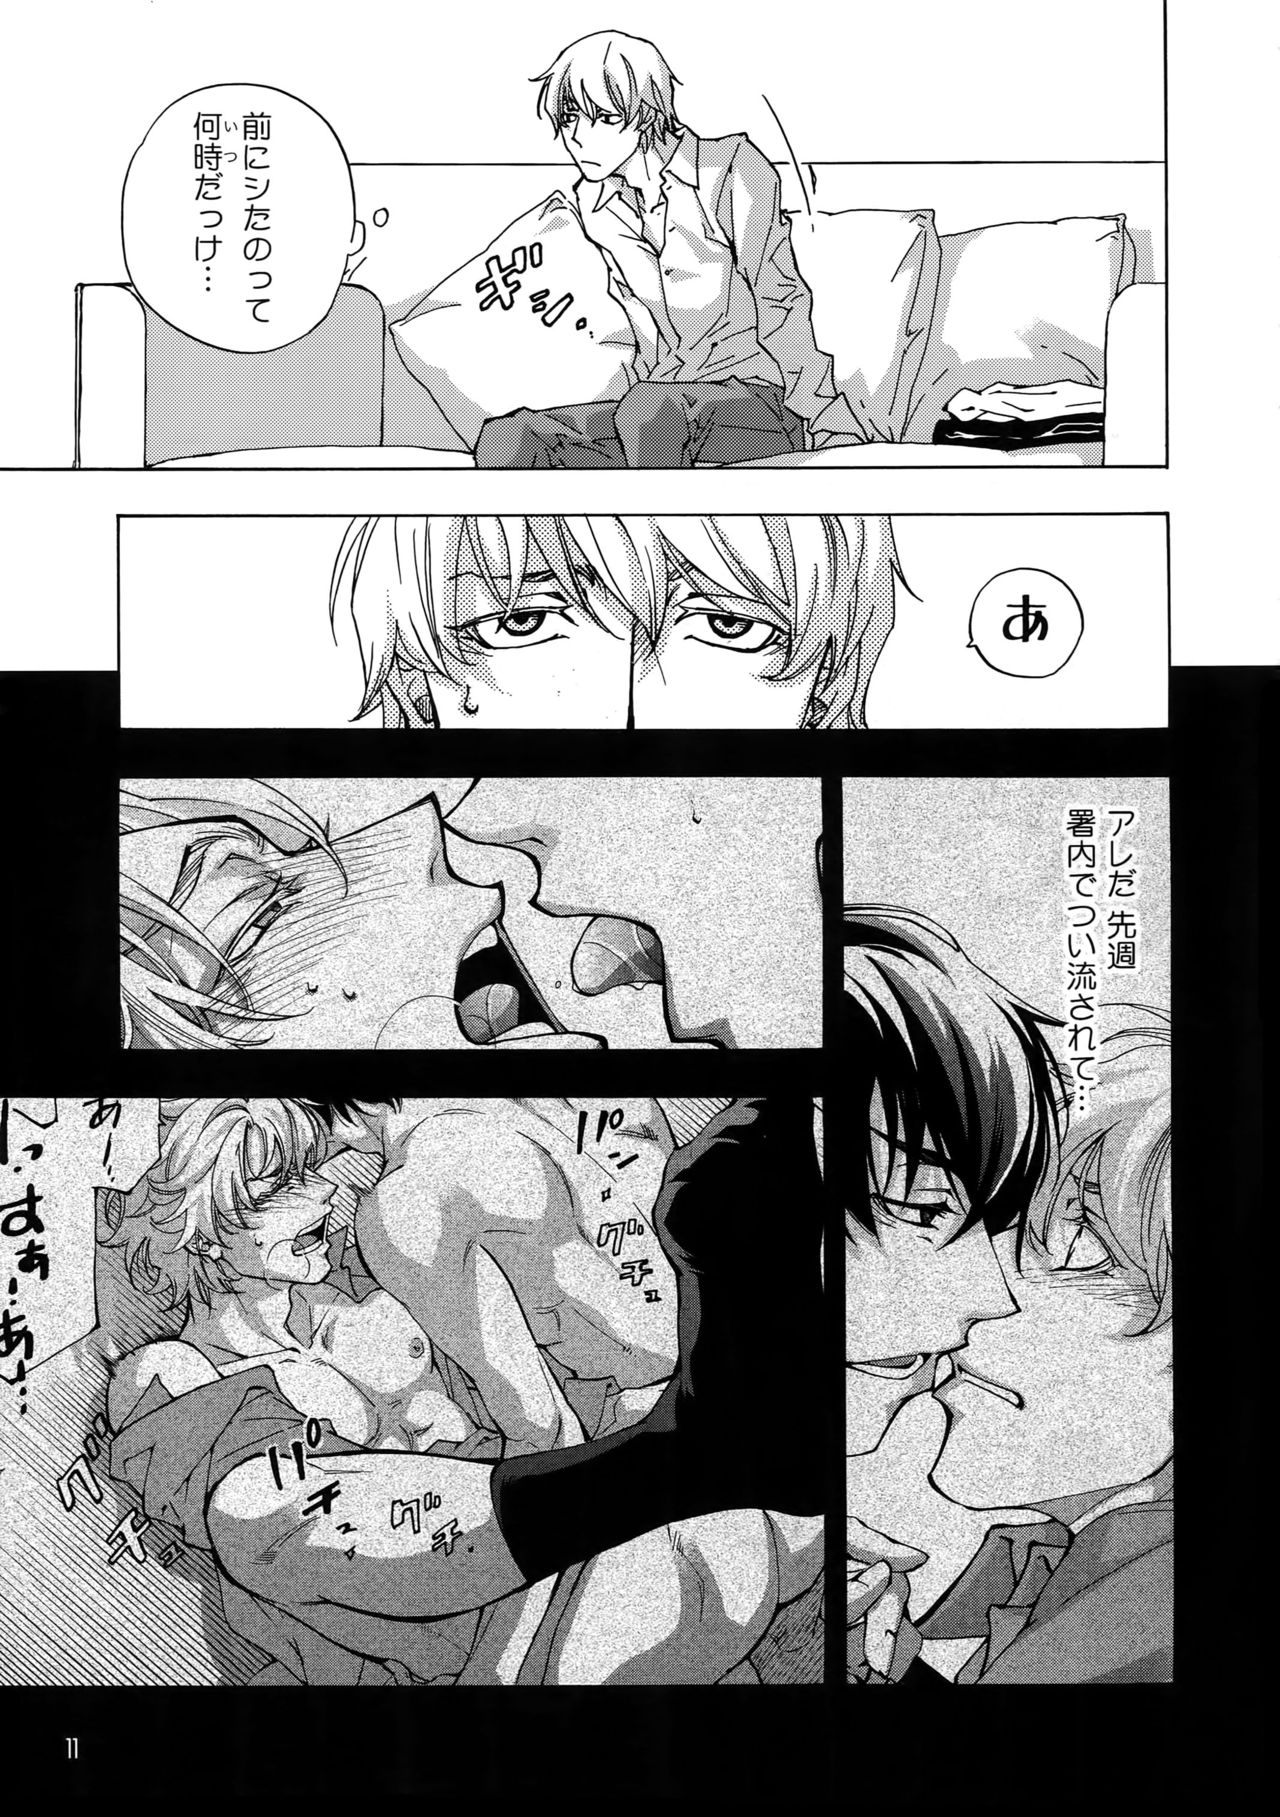 [East End Club (Matoh Sanami)] BACK STAGE PASS 10 page 8 full